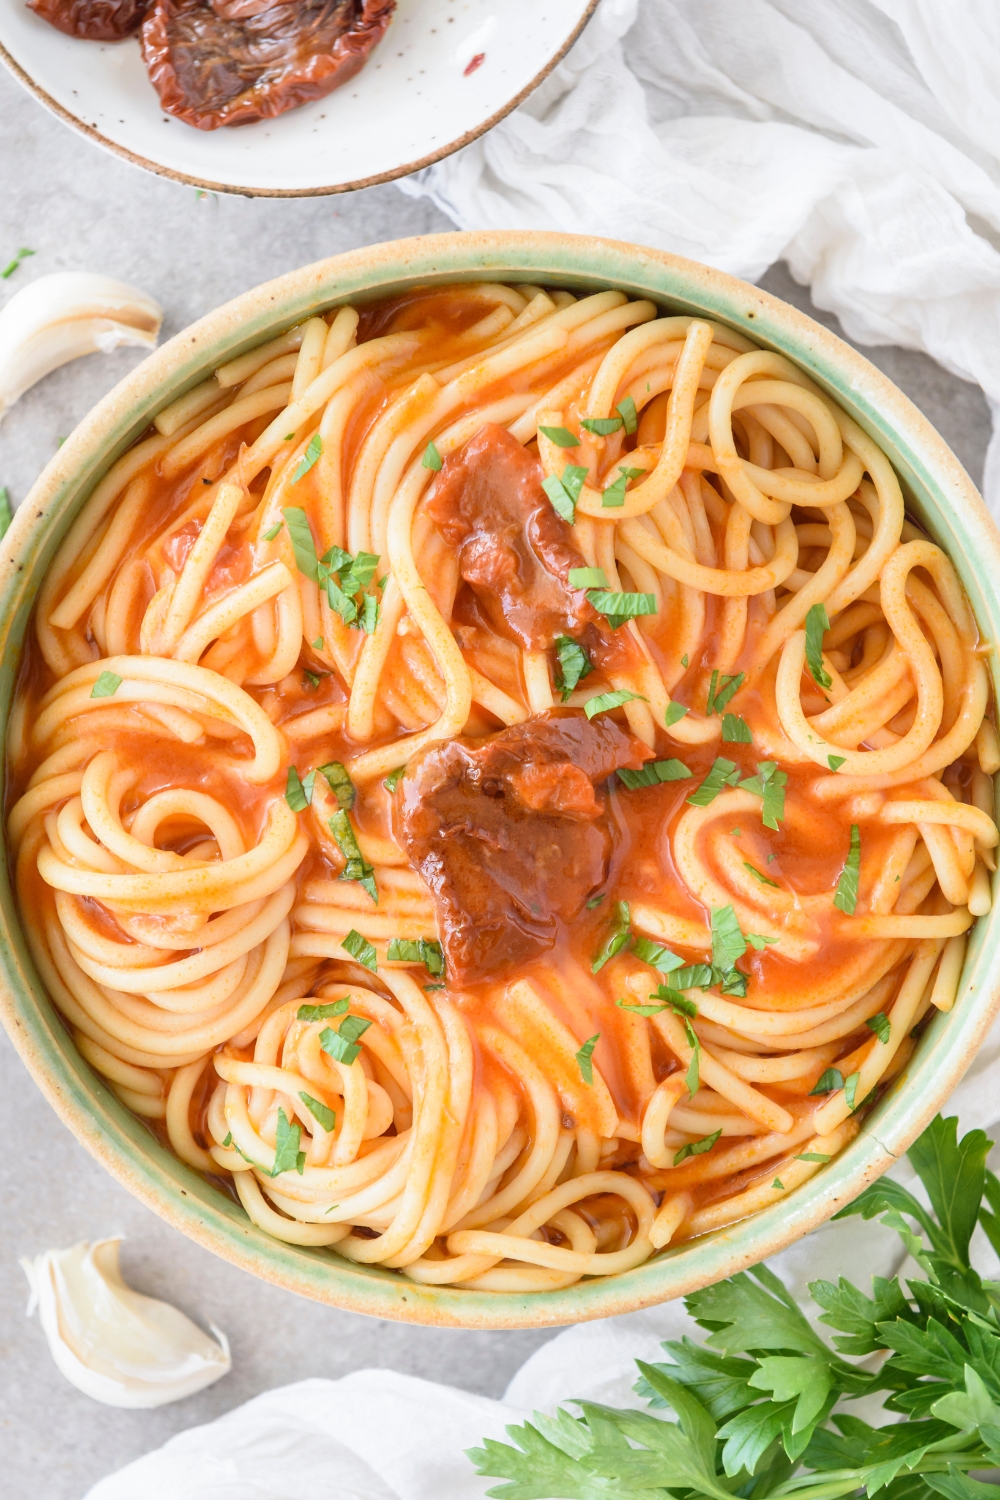 A bowl of spaghetti noodles covered in tomato sauce.